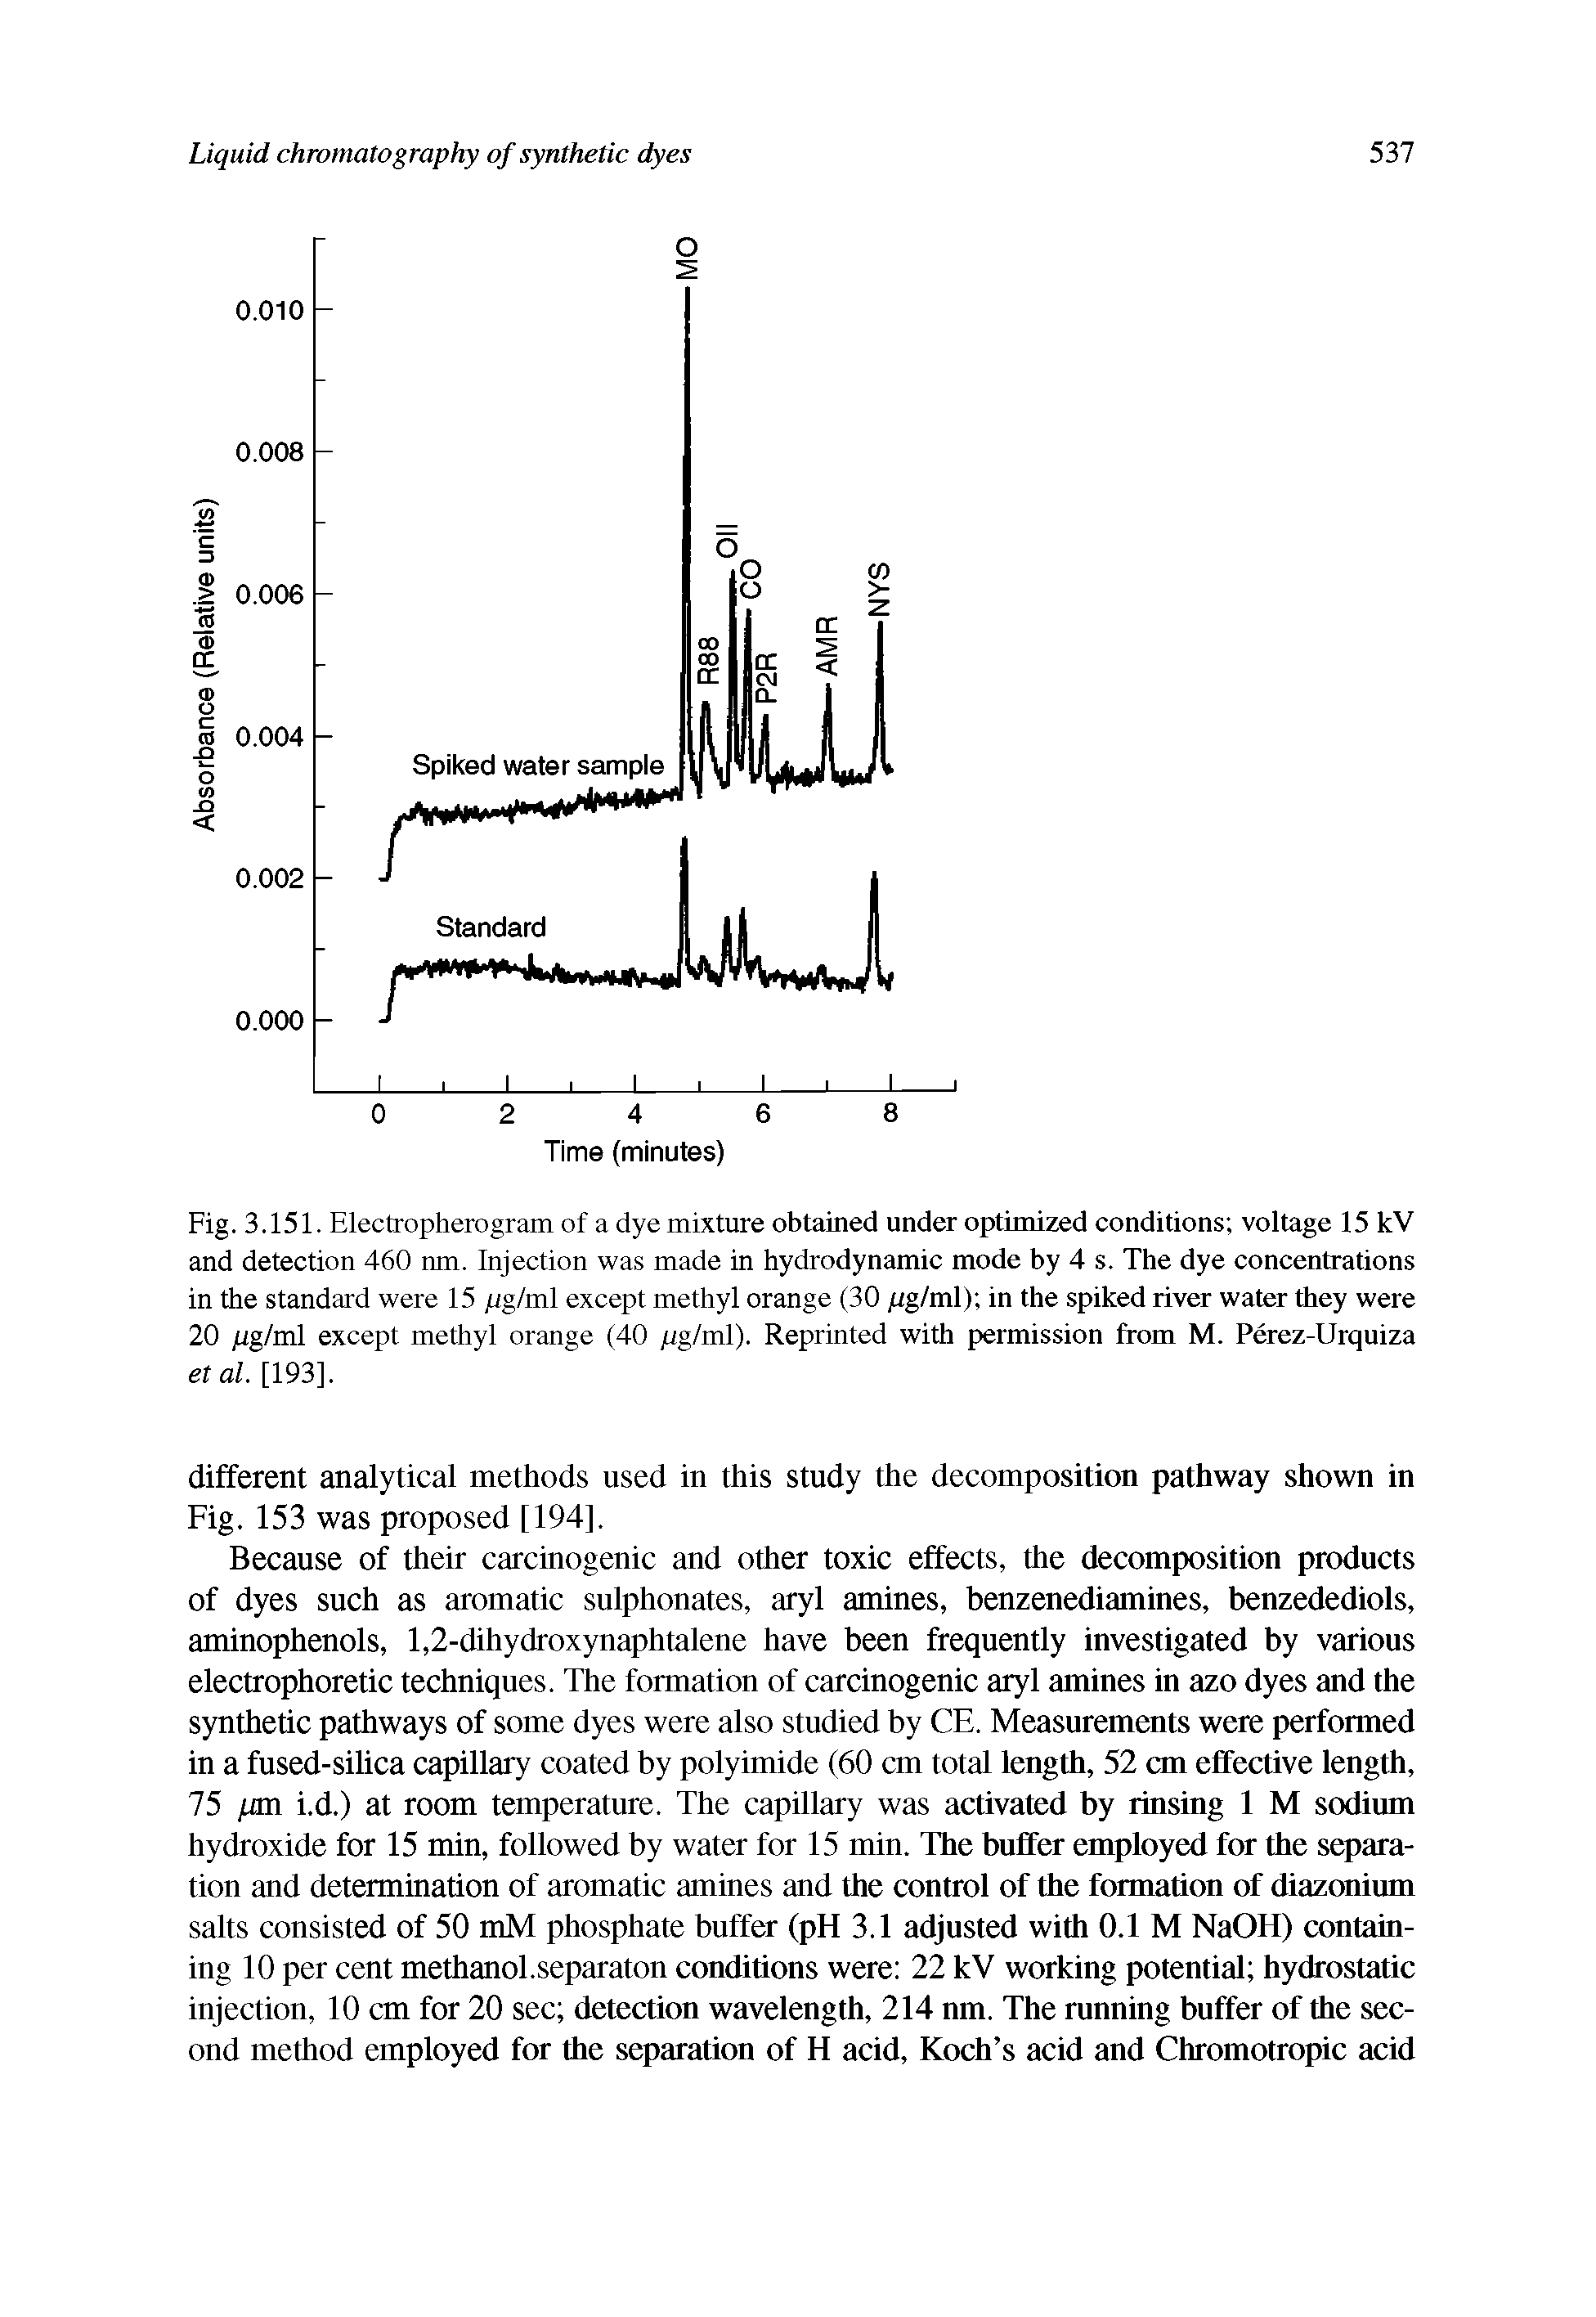 Fig. 3.151. Electropherogram of a dye mixture obtained under optimized conditions voltage 15 kV and detection 460 nm. Injection was made in hydrodynamic mode by 4 s. The dye concentrations in the standard were 15 jUg/ml except methyl orange (30, ug/inl) in the spiked river water they were 20 jUg/ml except methyl orange (40 pg/ml). Reprinted with permission from M. Perez-Urquiza et al. [193],...